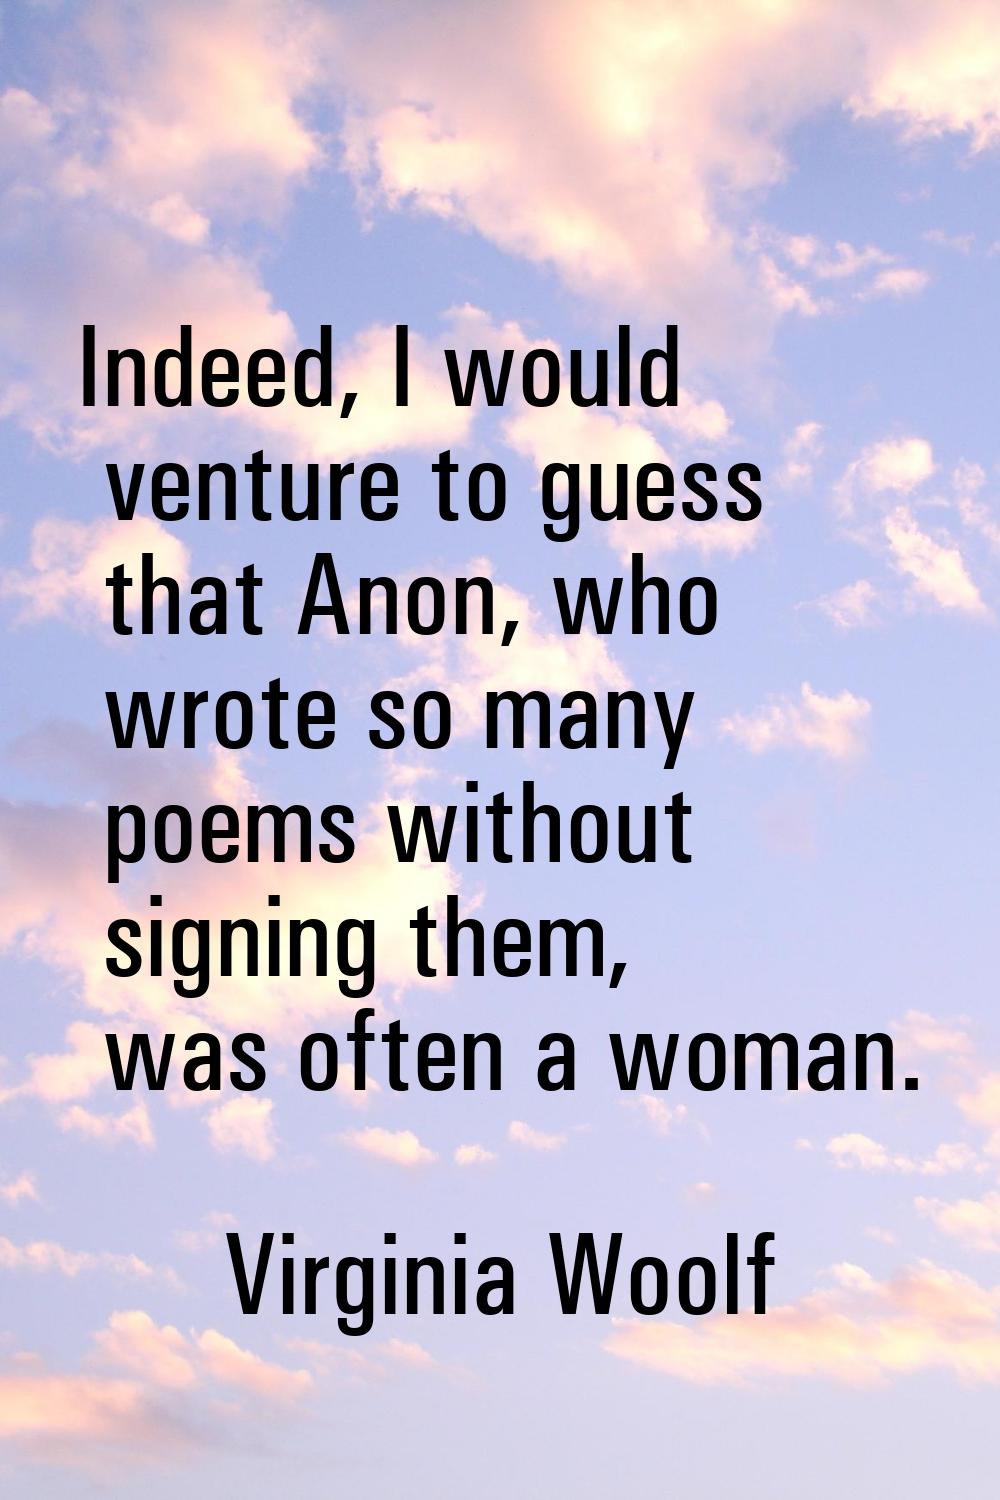 Indeed, I would venture to guess that Anon, who wrote so many poems without signing them, was often